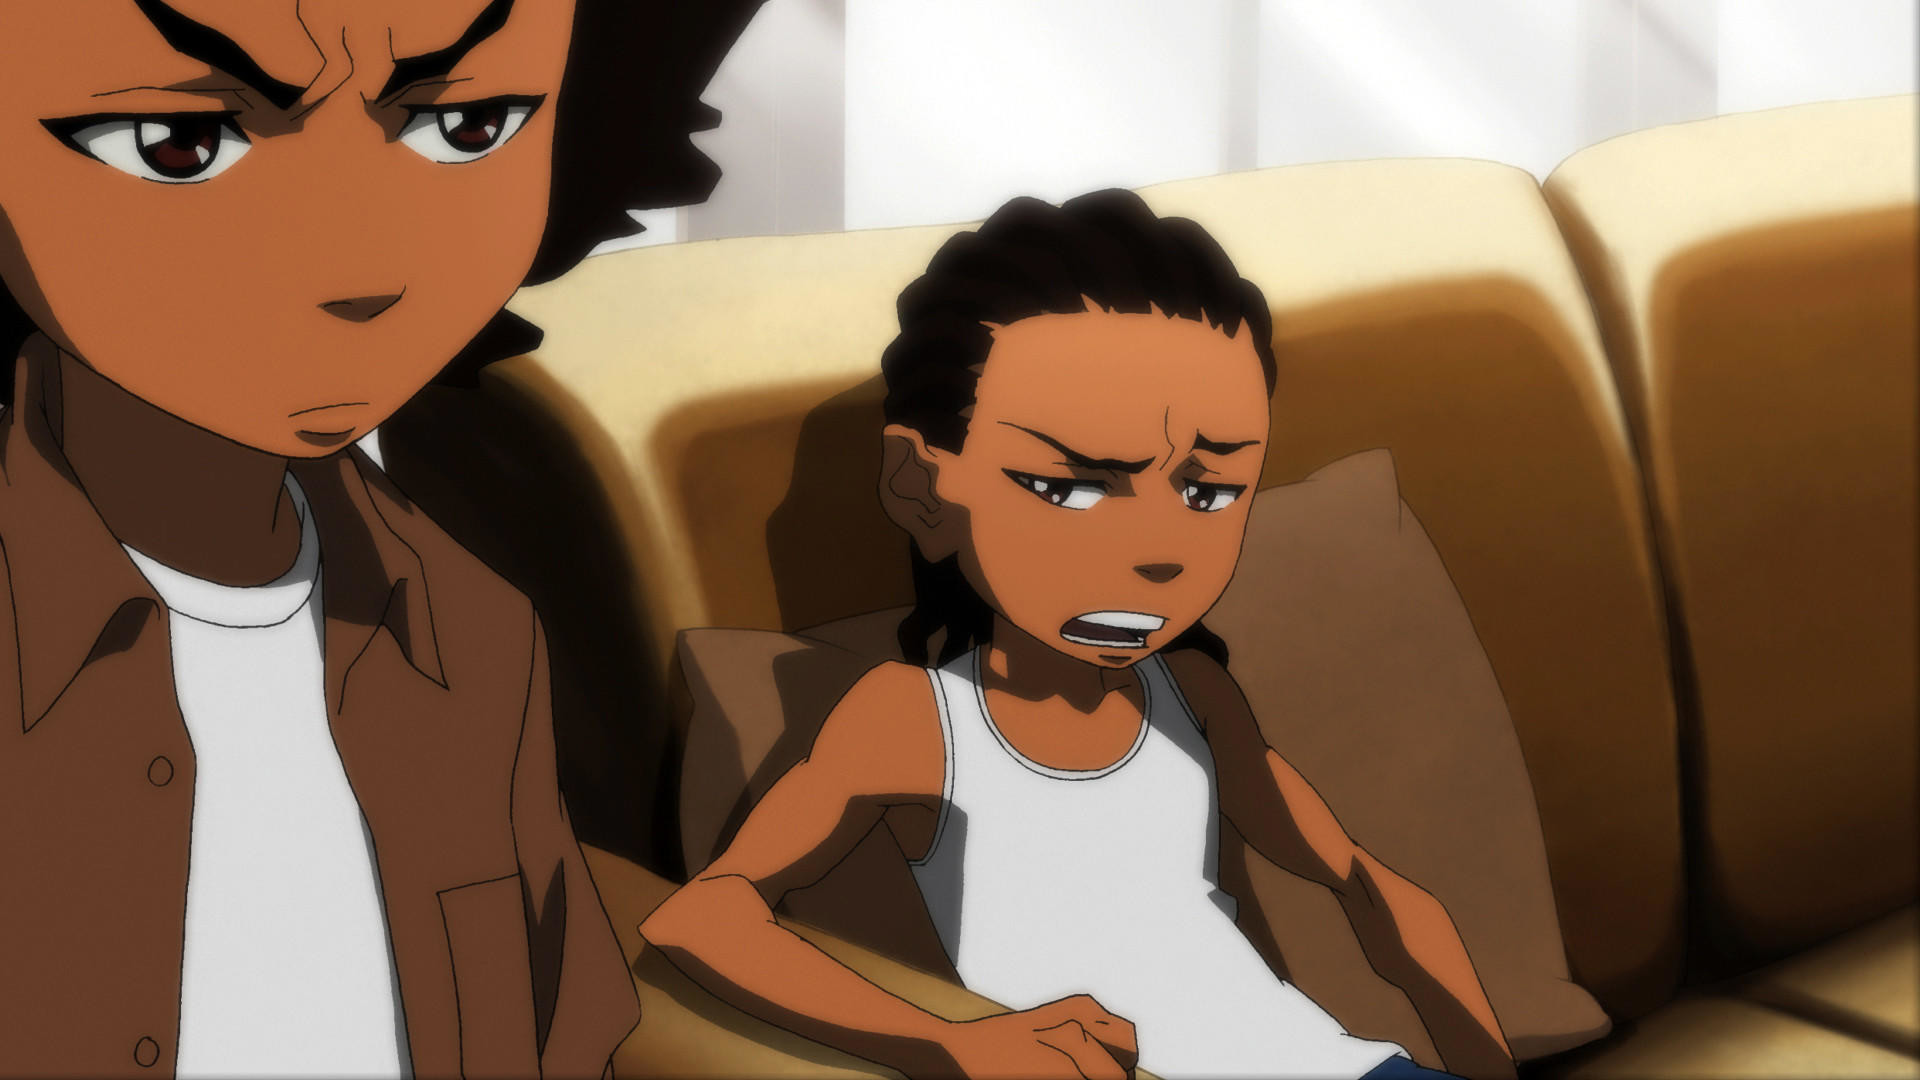 1920x1080 Huey Freeman, left, and brother Riley Freeman (both voiced by Reg...